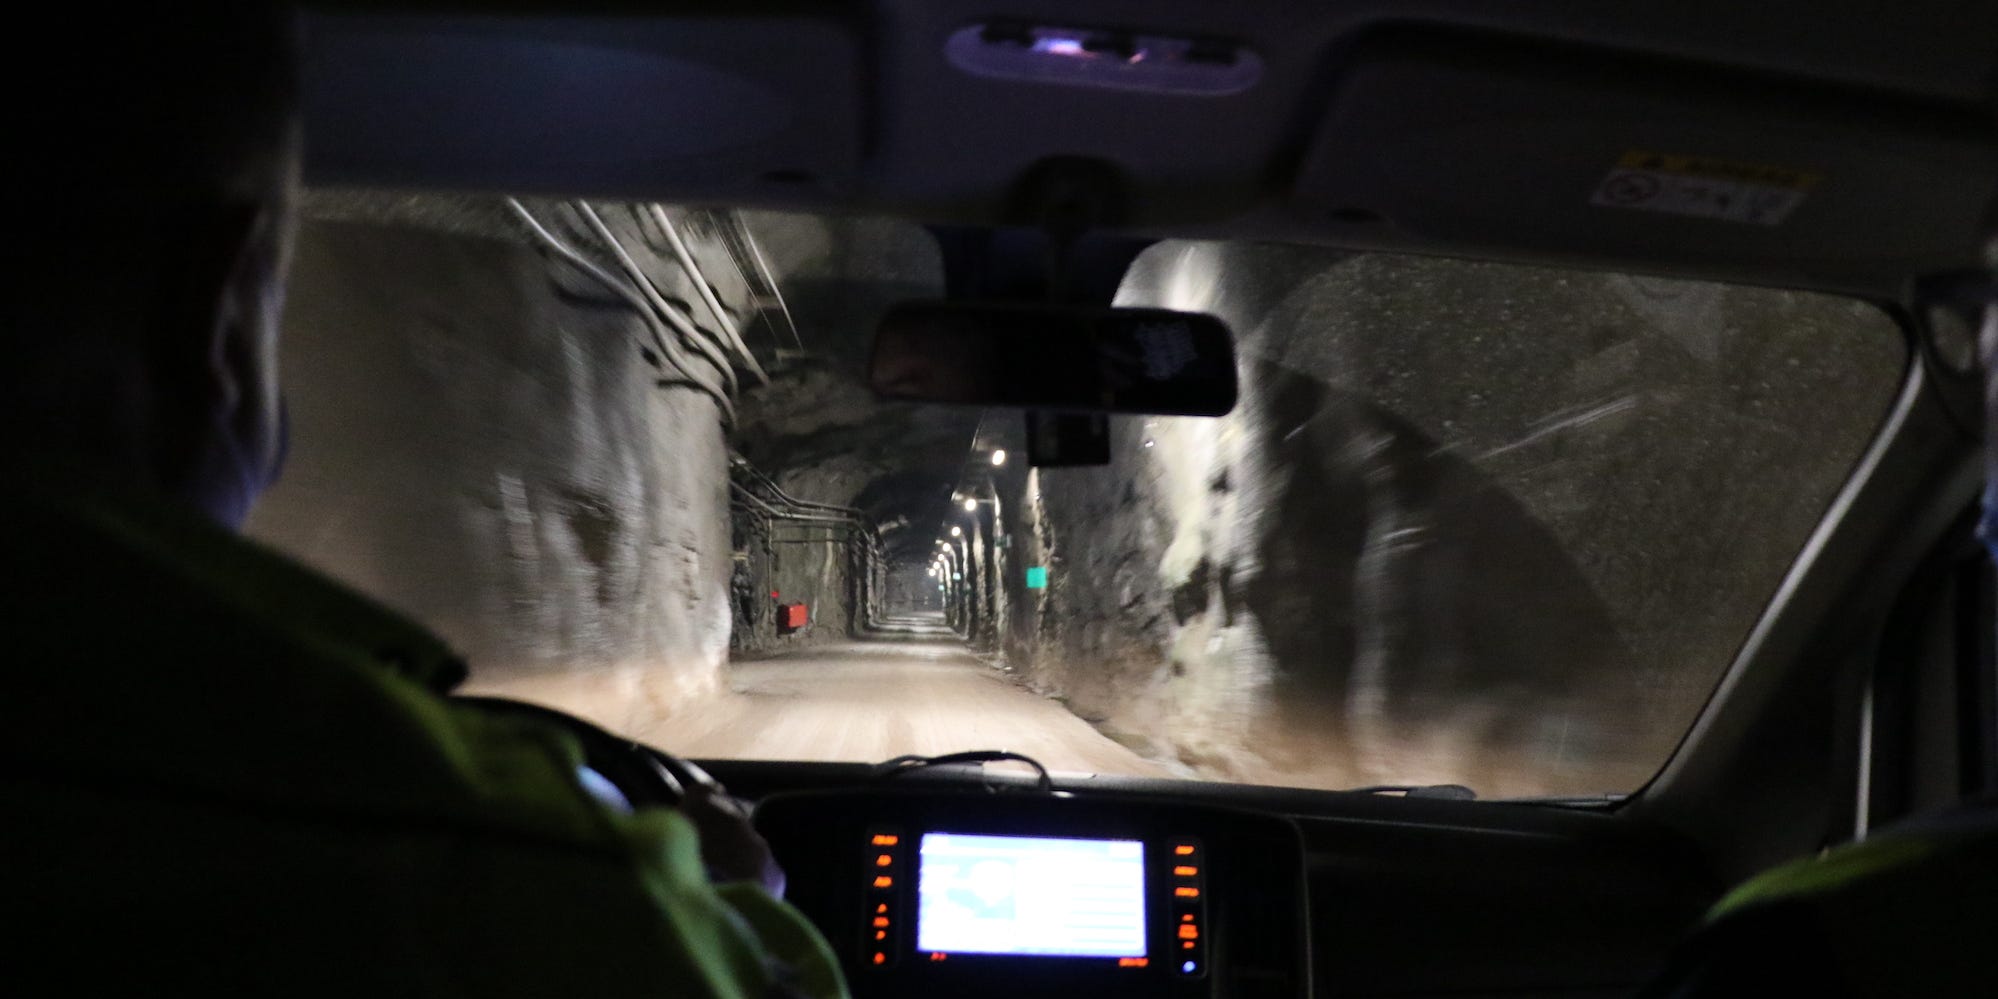 A picture from inside the van shows the tunnels in Onkalo snaking down.